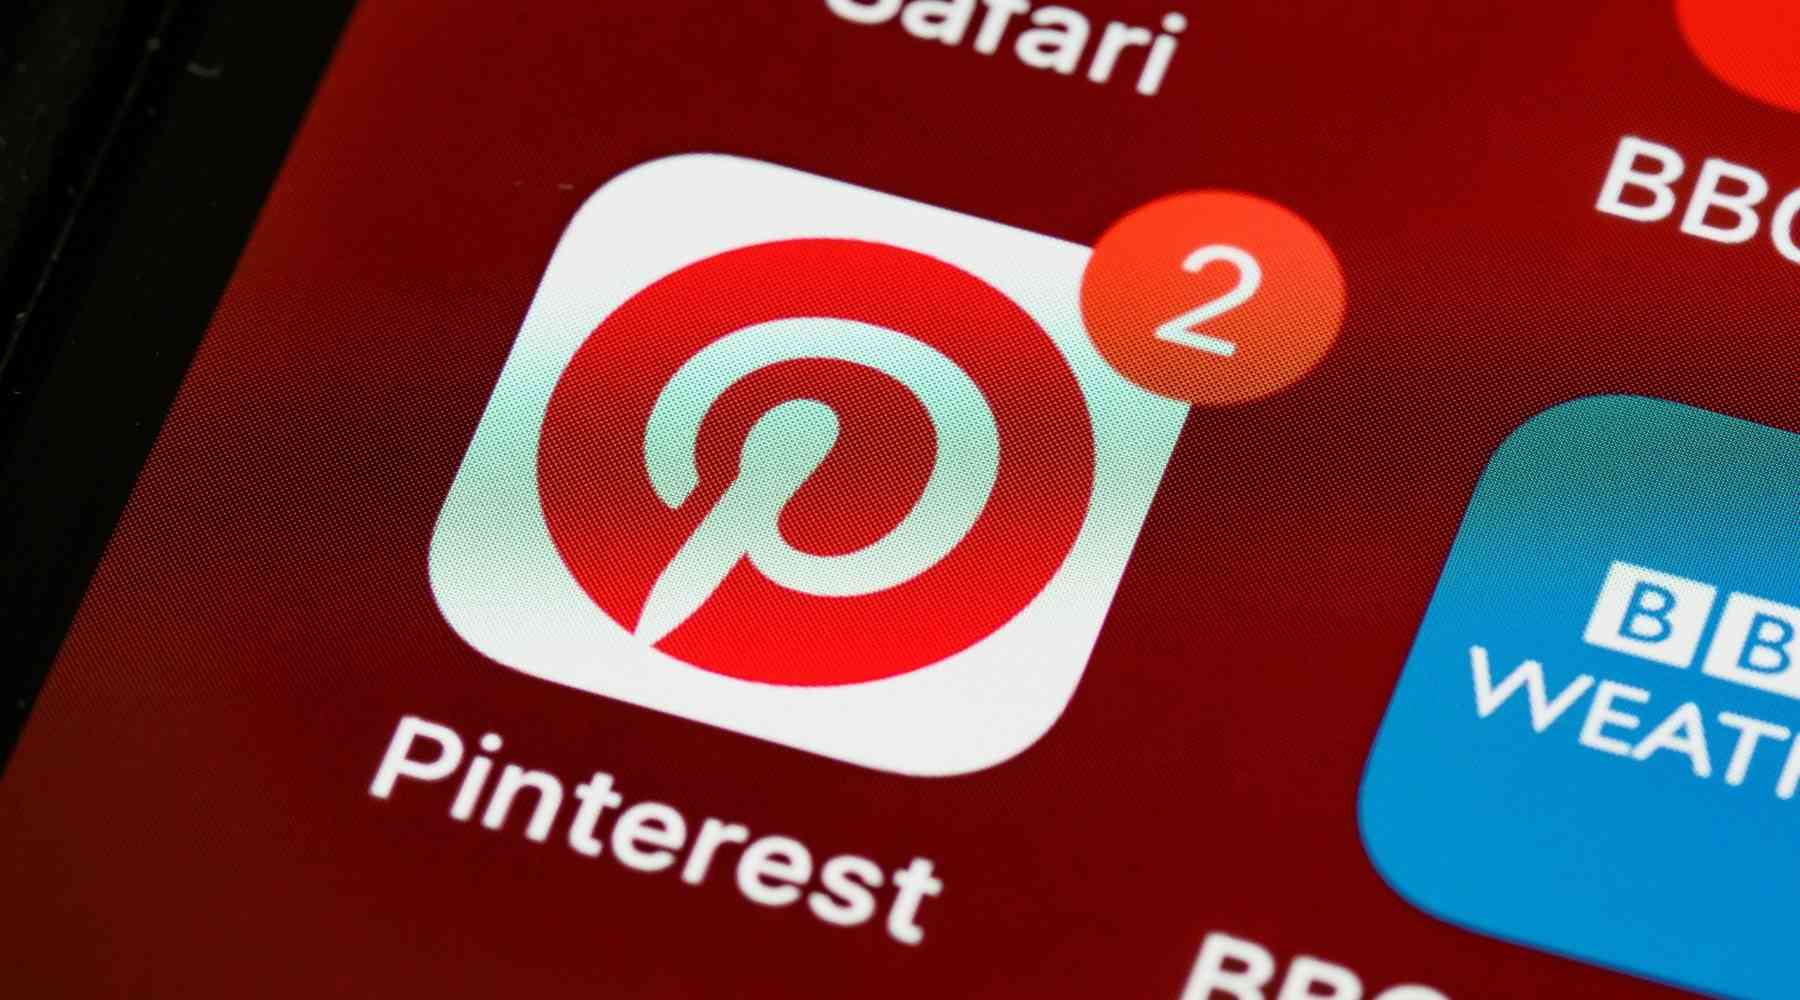 How to Become a Pinterest Manager